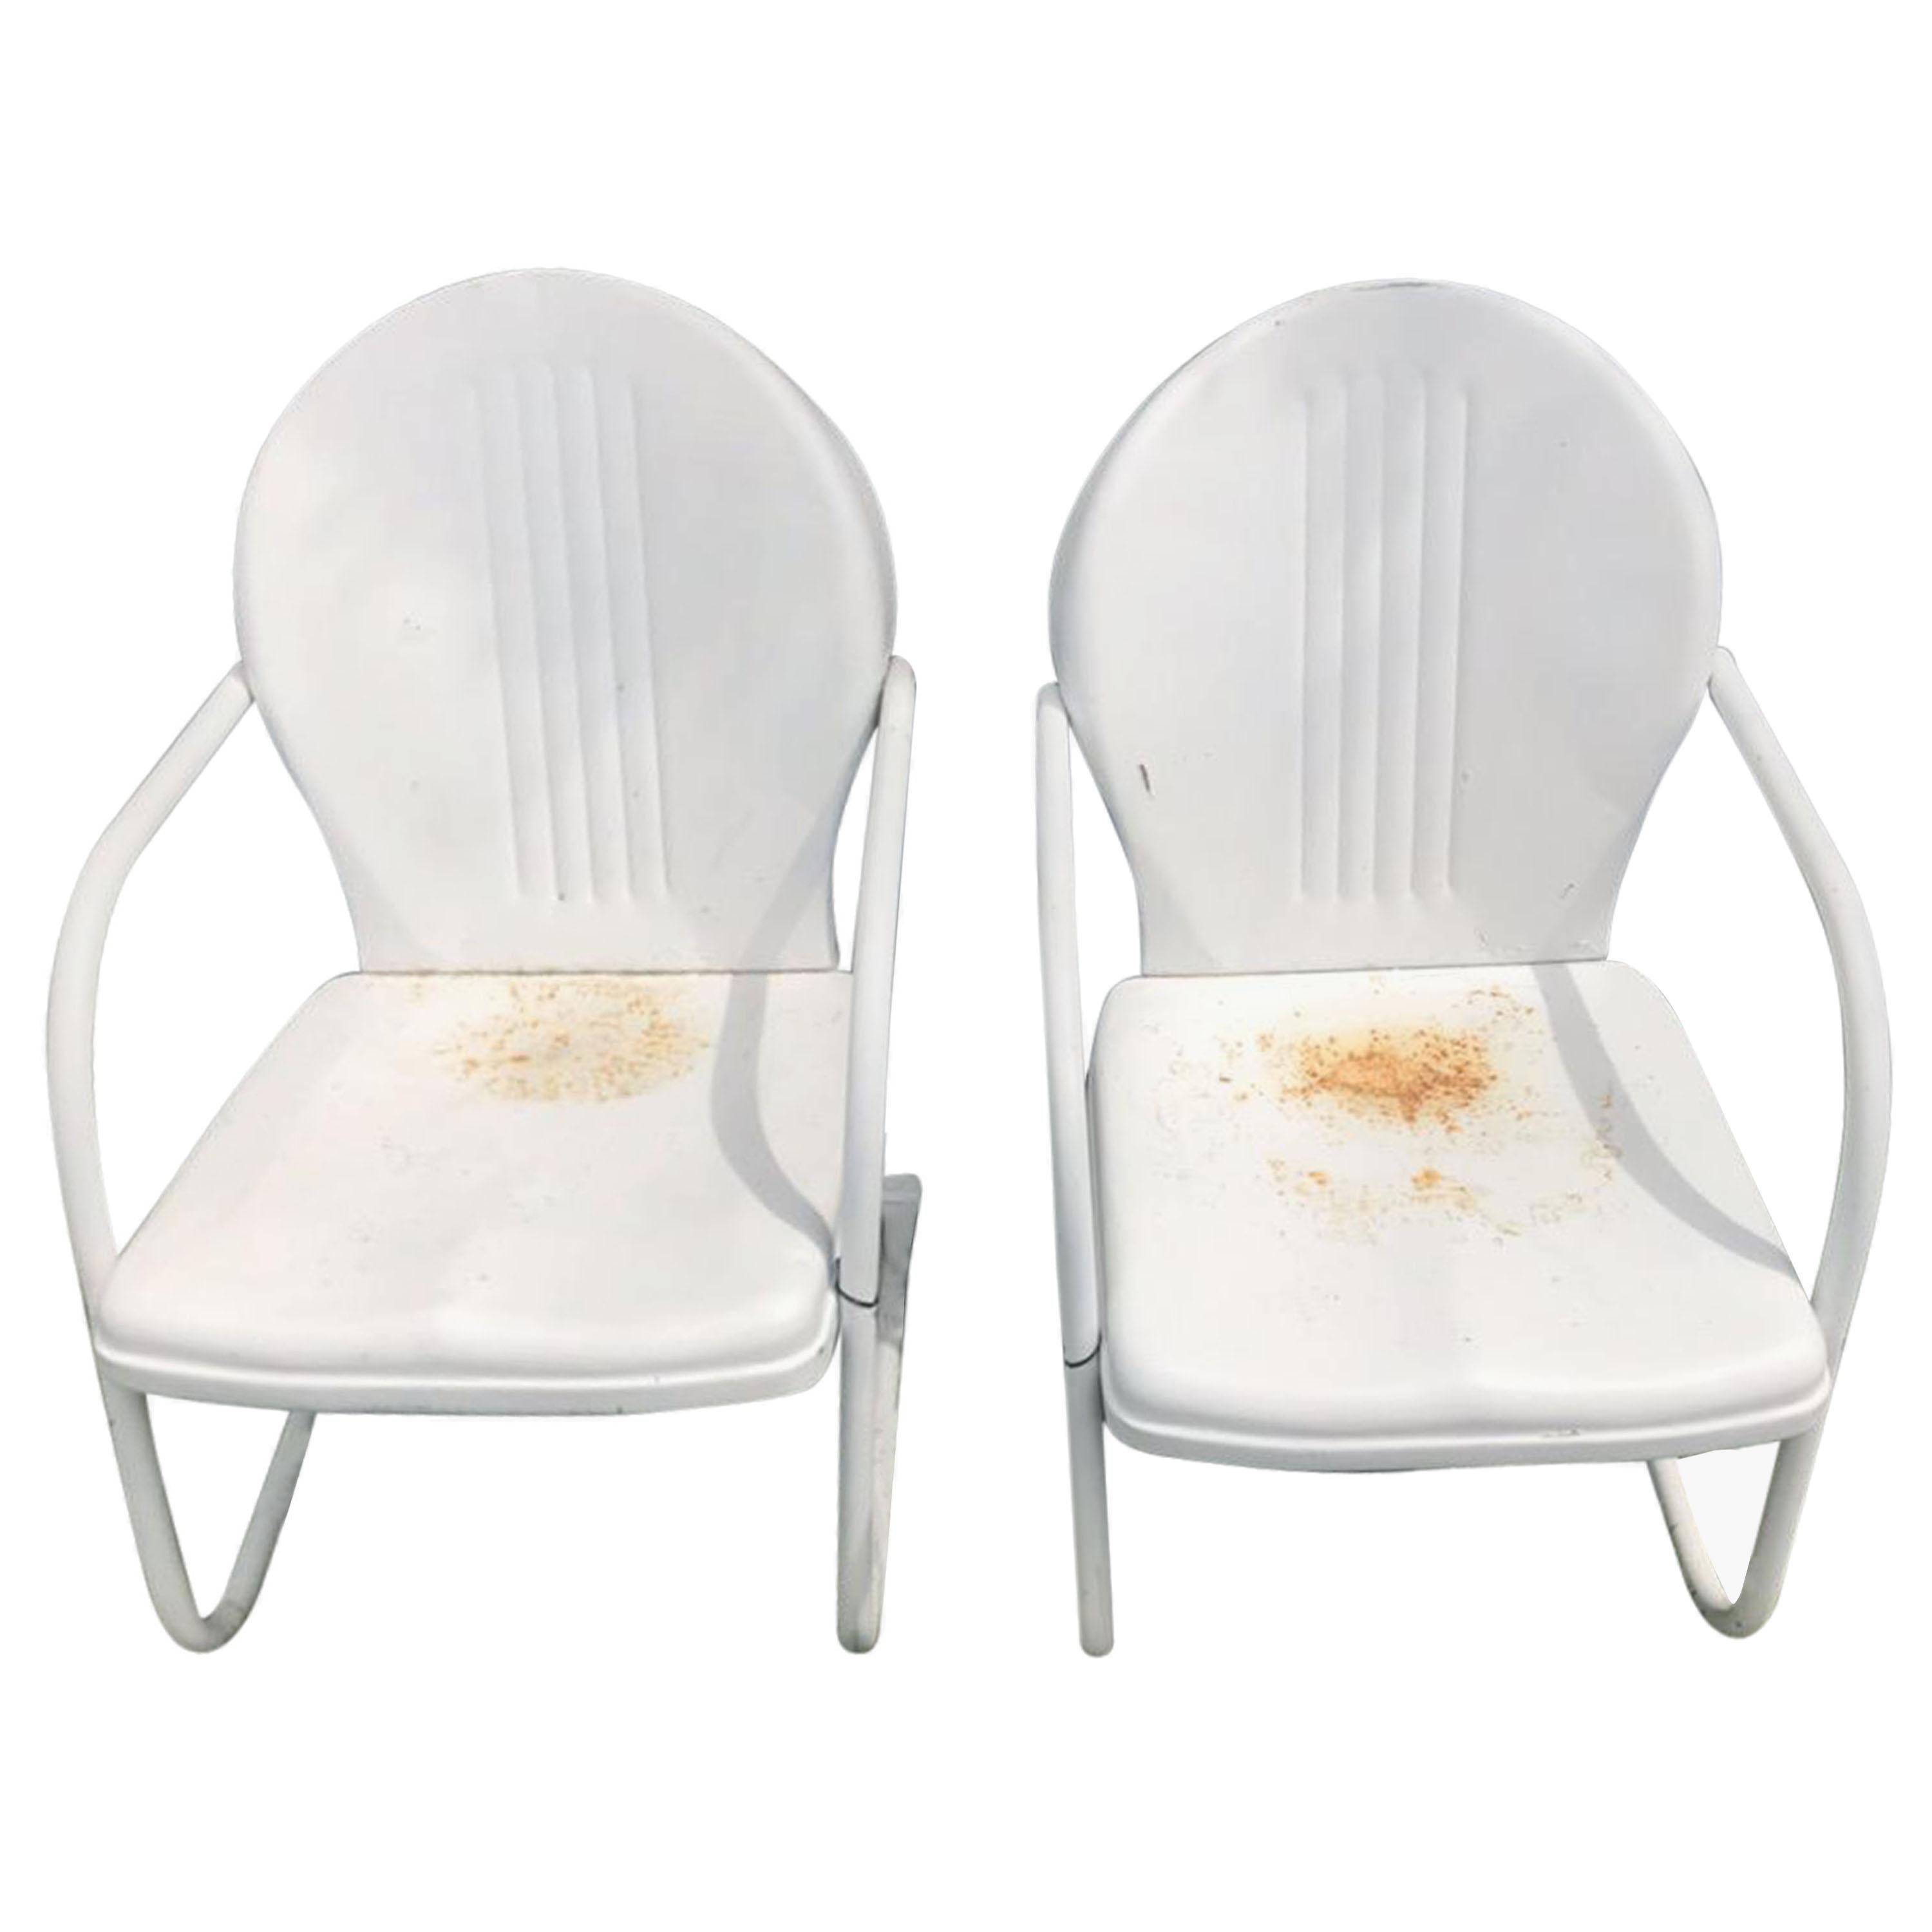 Midcentury Out Door Chairs in Old White Paint, Pair For Sale